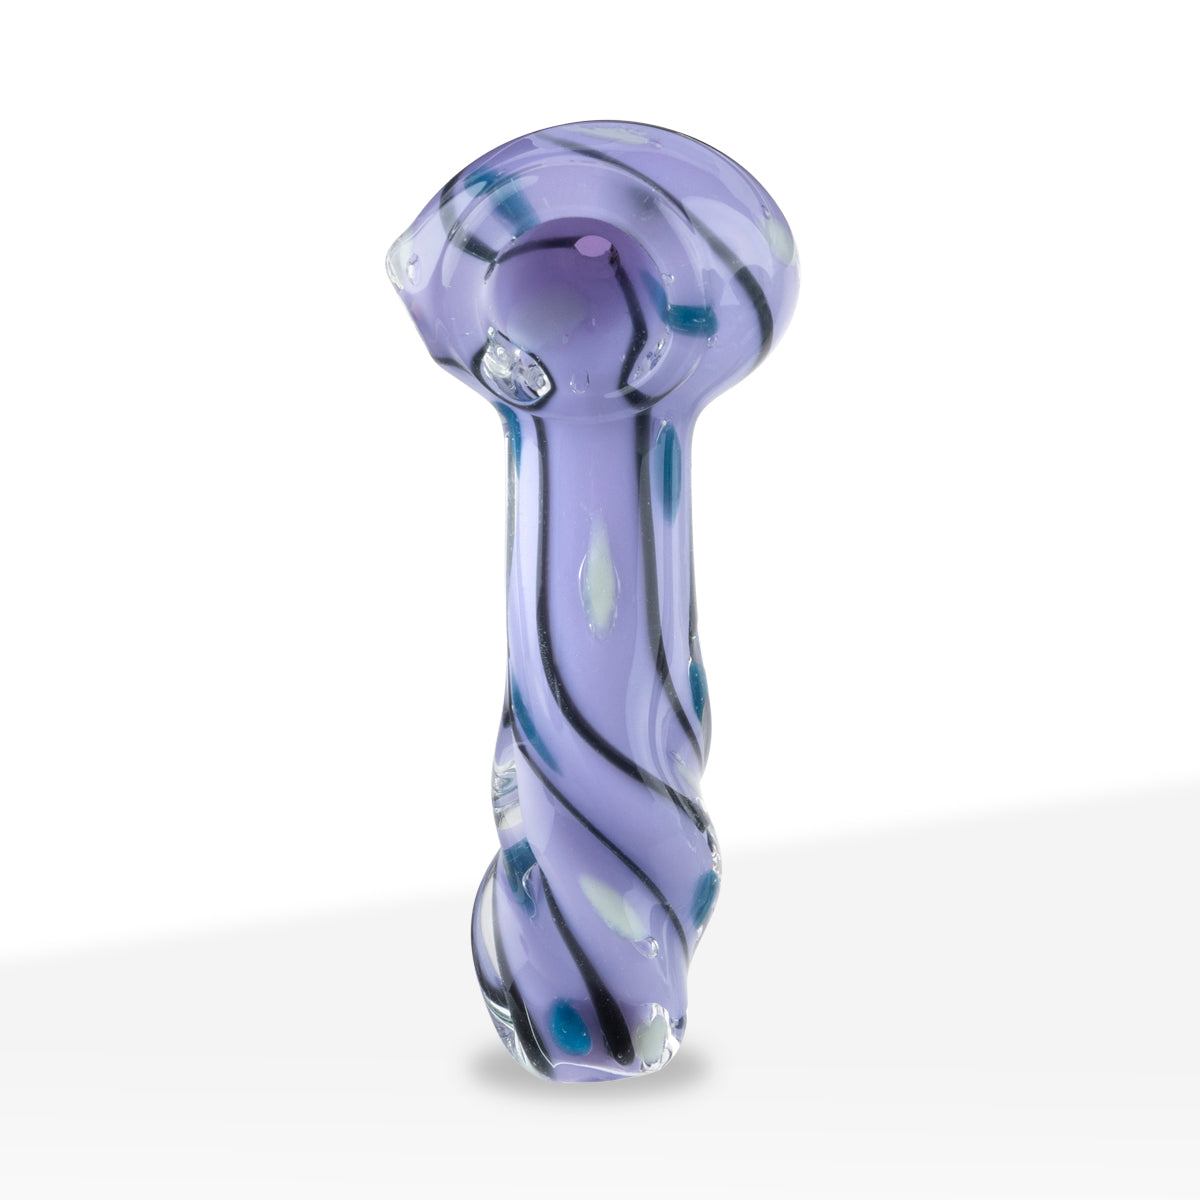 Hand Pipe | Classic Glass Spoon Slyme Lines + Dots Hand Pipe | 3.5" - Glass - 3 Count